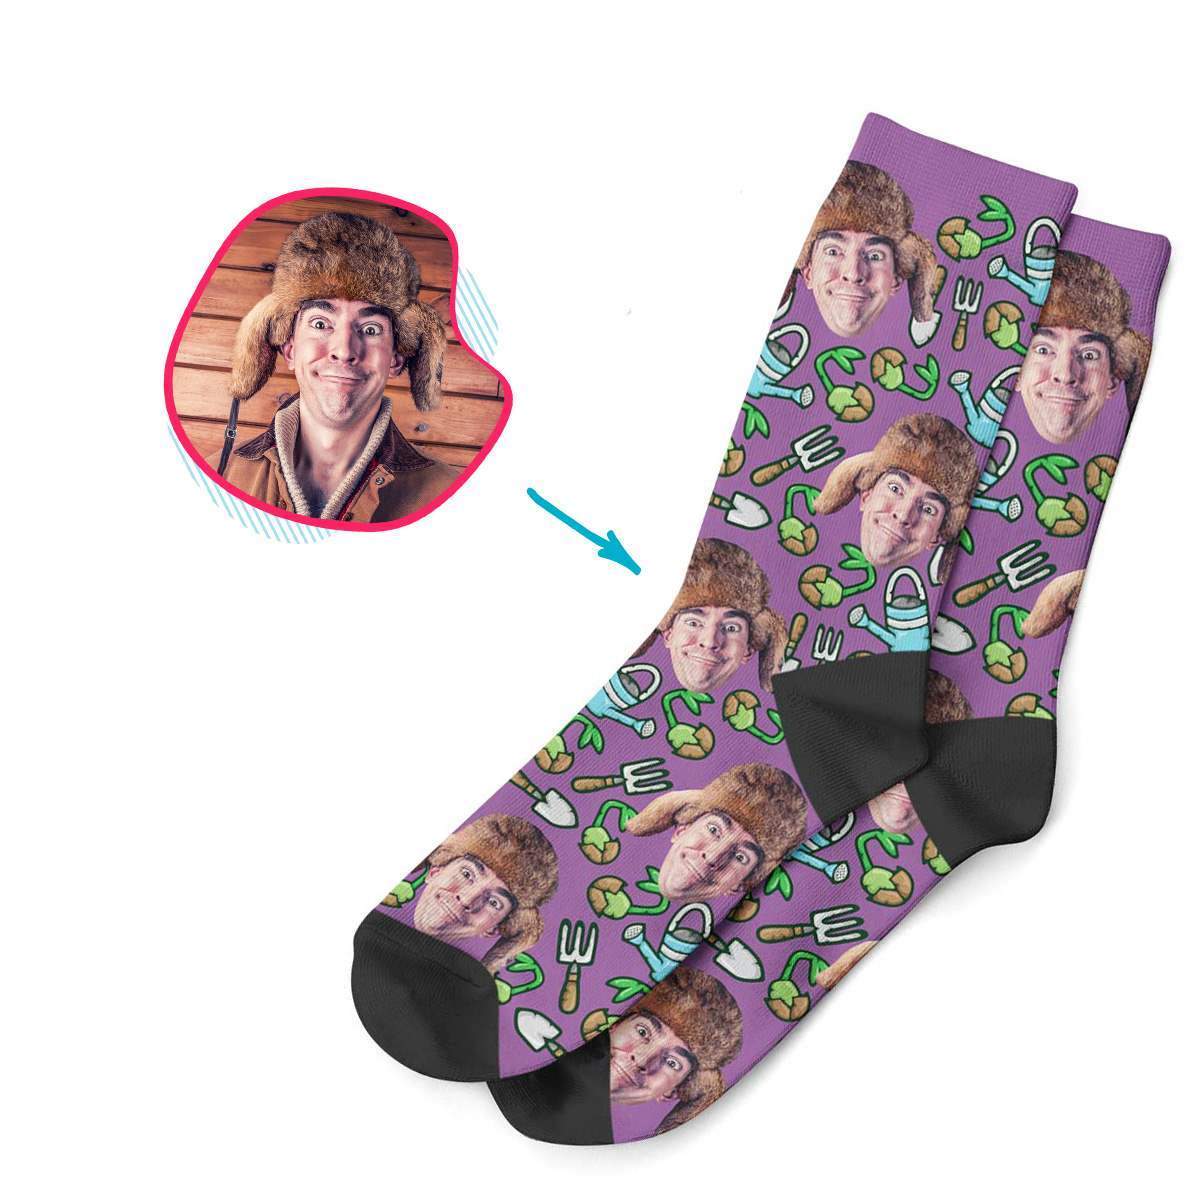 purple Gardening socks personalized with photo of face printed on them